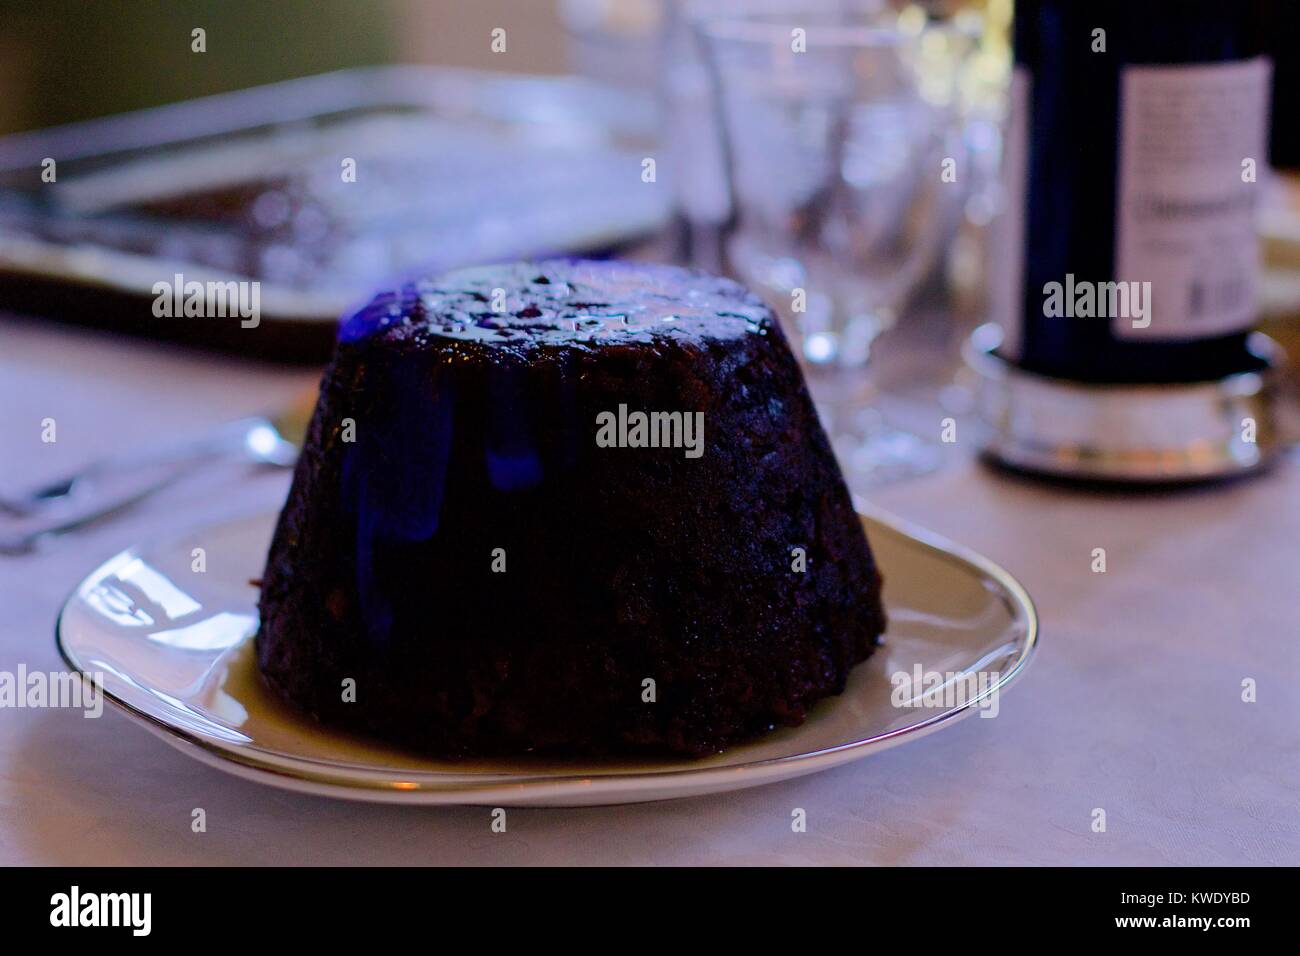 Flaming Christmas pudding on white tablecloth with drinks in the background, UK Stock Photo